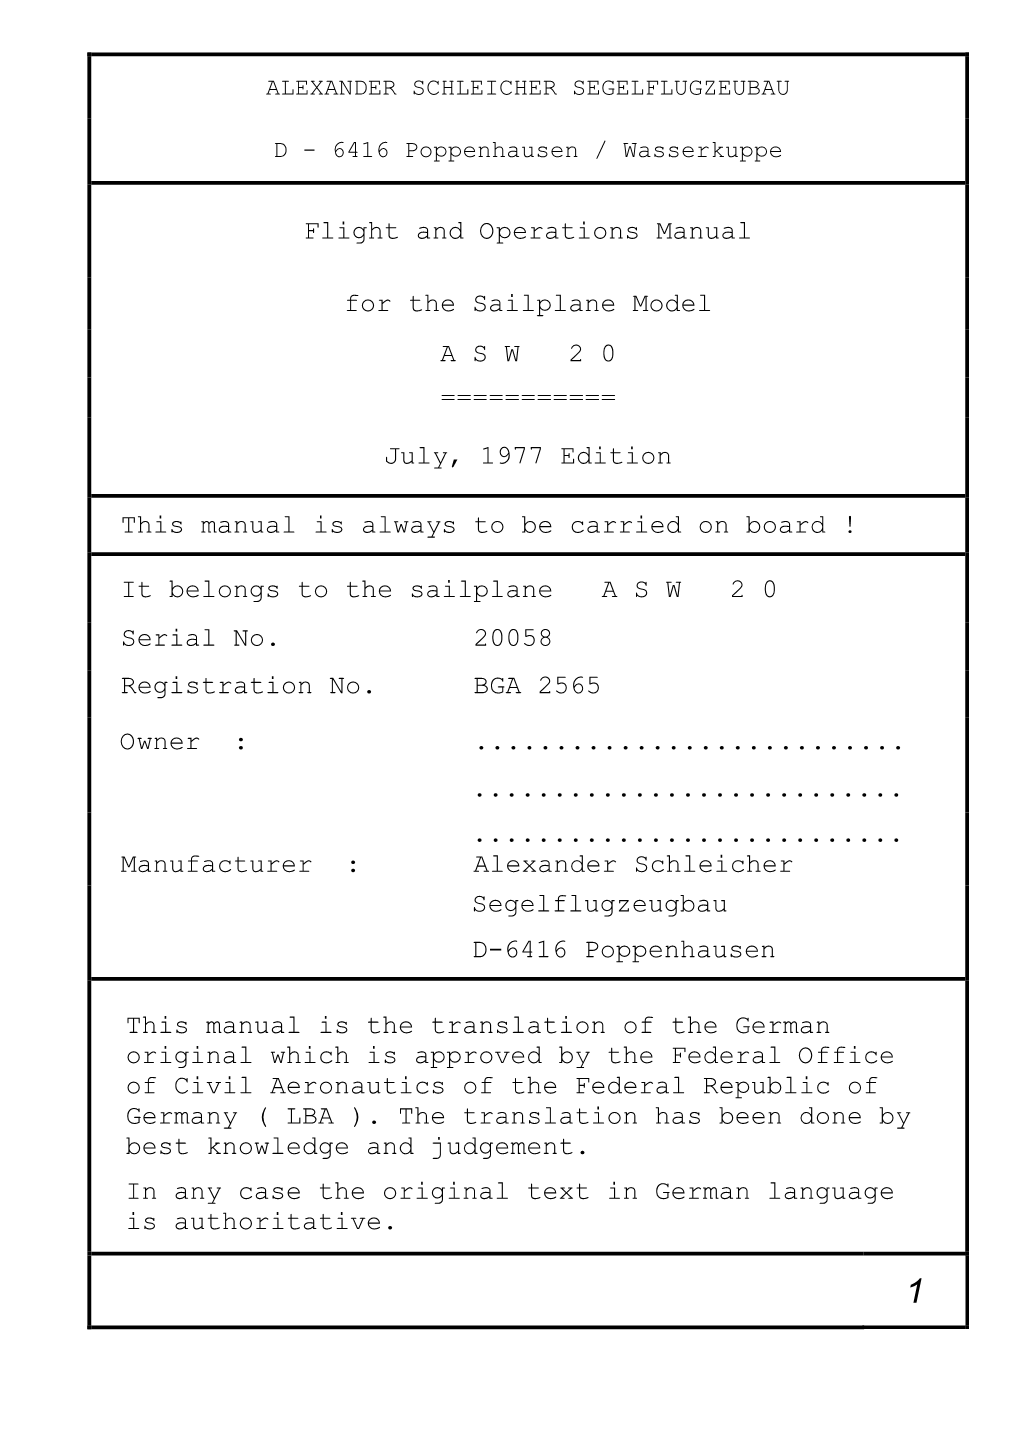 Flight and Operations Manual for the Sailplane Model a S W 2 0